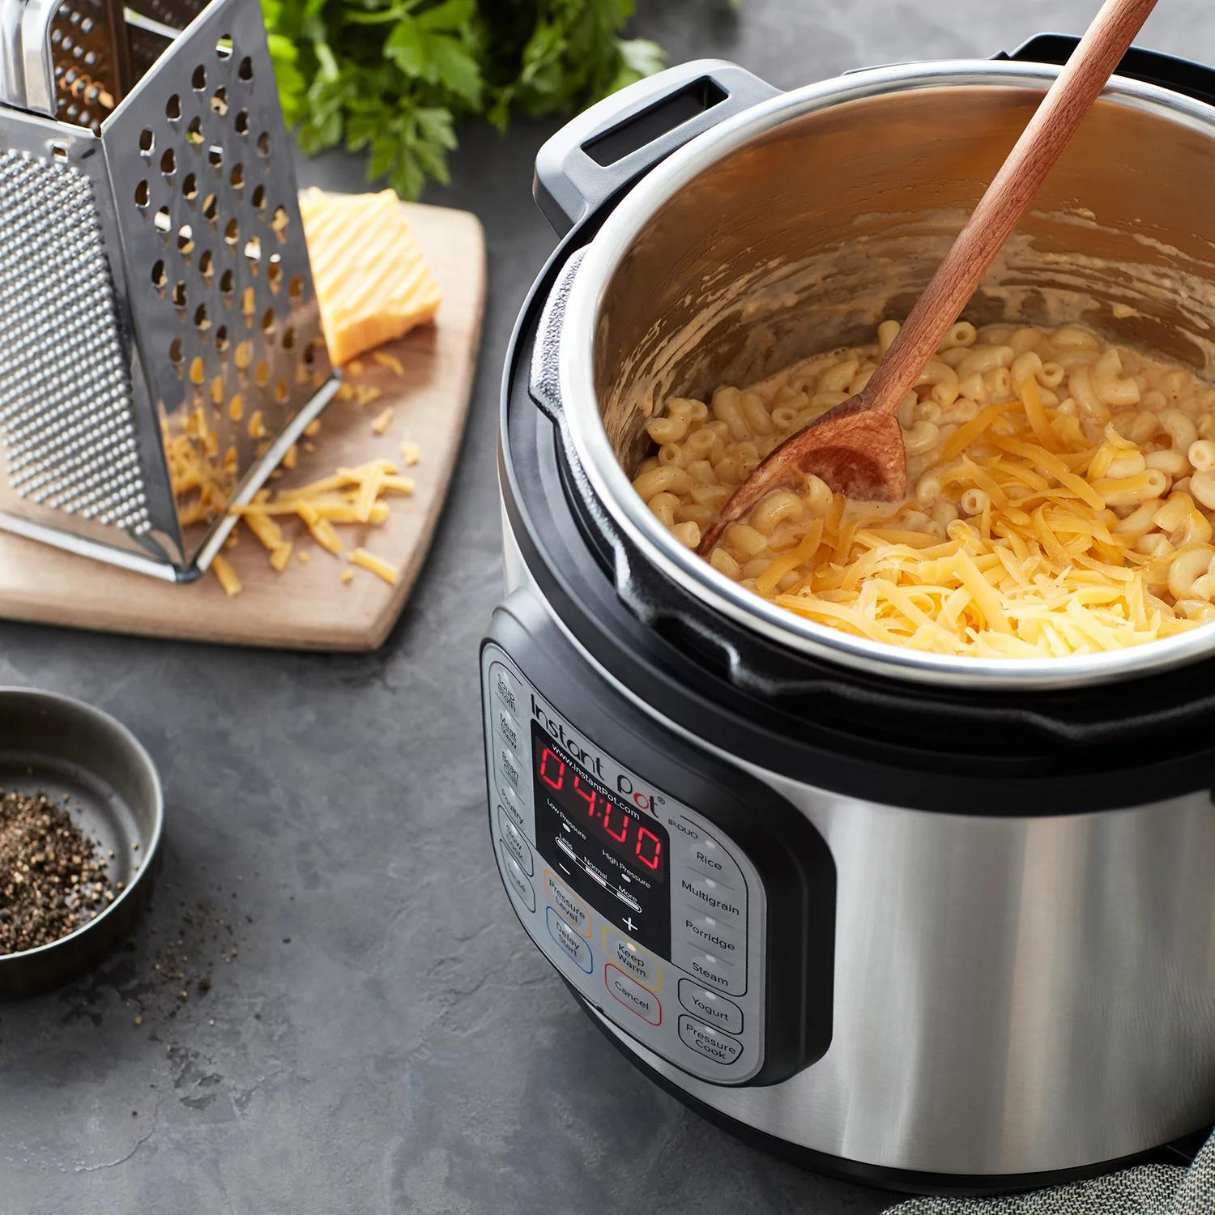 10 Amazing Instant Pot Duo60 6 Qt 7-In-1 Multi-Use Programmable Pressure Cooker For 2024